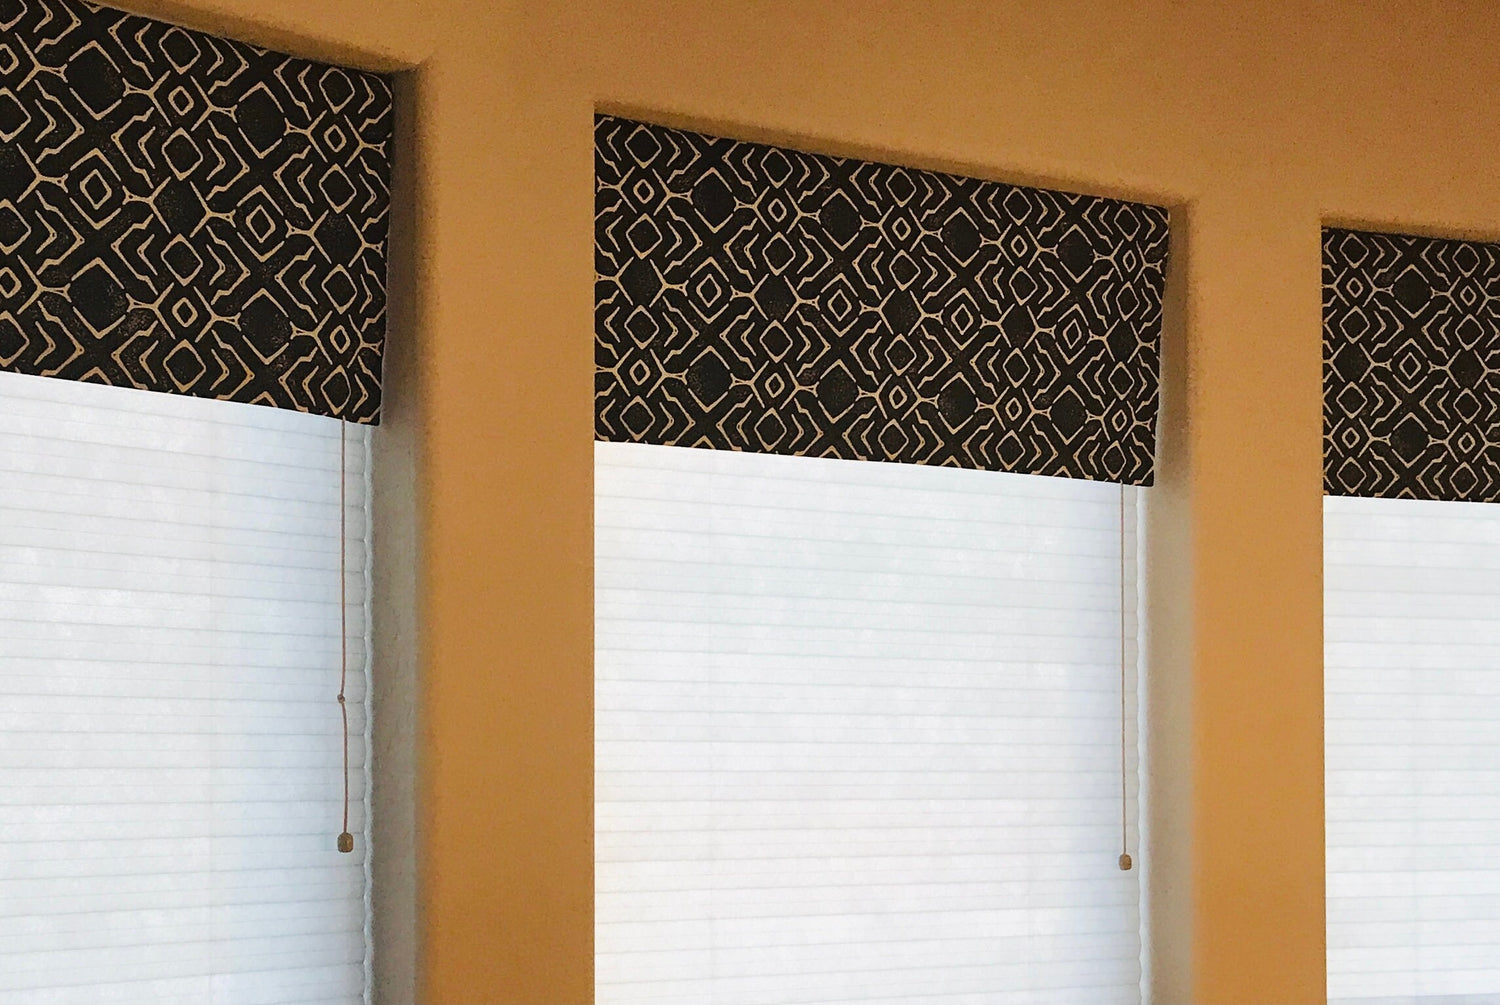 Straight Modern Valance in Navy and Natural or Grey and Natural Trellis Print on Cotton Canvas Fabric. Custom Made Rustic Kitchen Valance